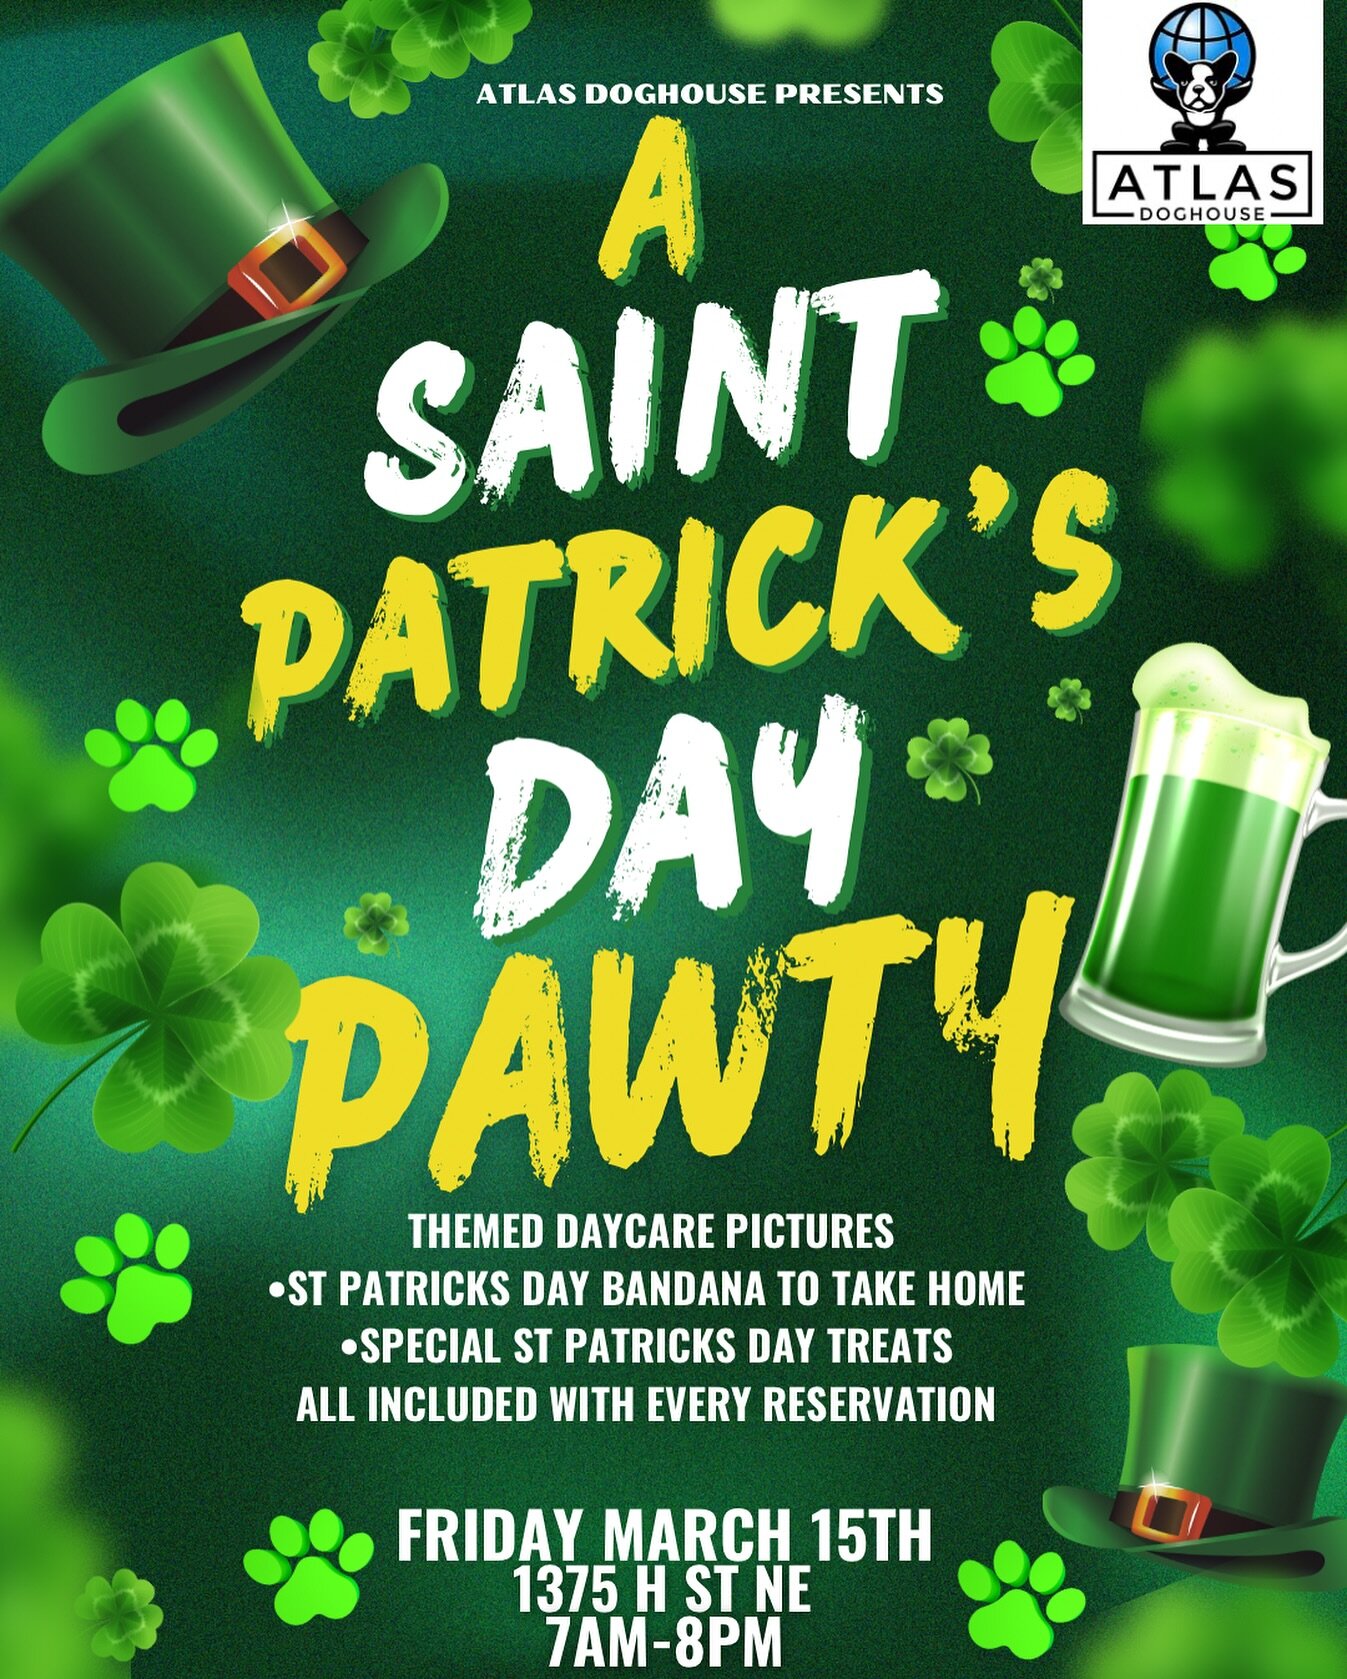 You are cordially invited to Atlas Doghouse&rsquo;s St Patrick&rsquo;s Day Pawty!!🍀🌈🍻😍🥳🐶🇮🇪

Join us at our H street location this Friday, March 15th for an all day PAWTY from 7am-8pm!! 🥳🥳🥳

We will be celebrating with adorably themed photo